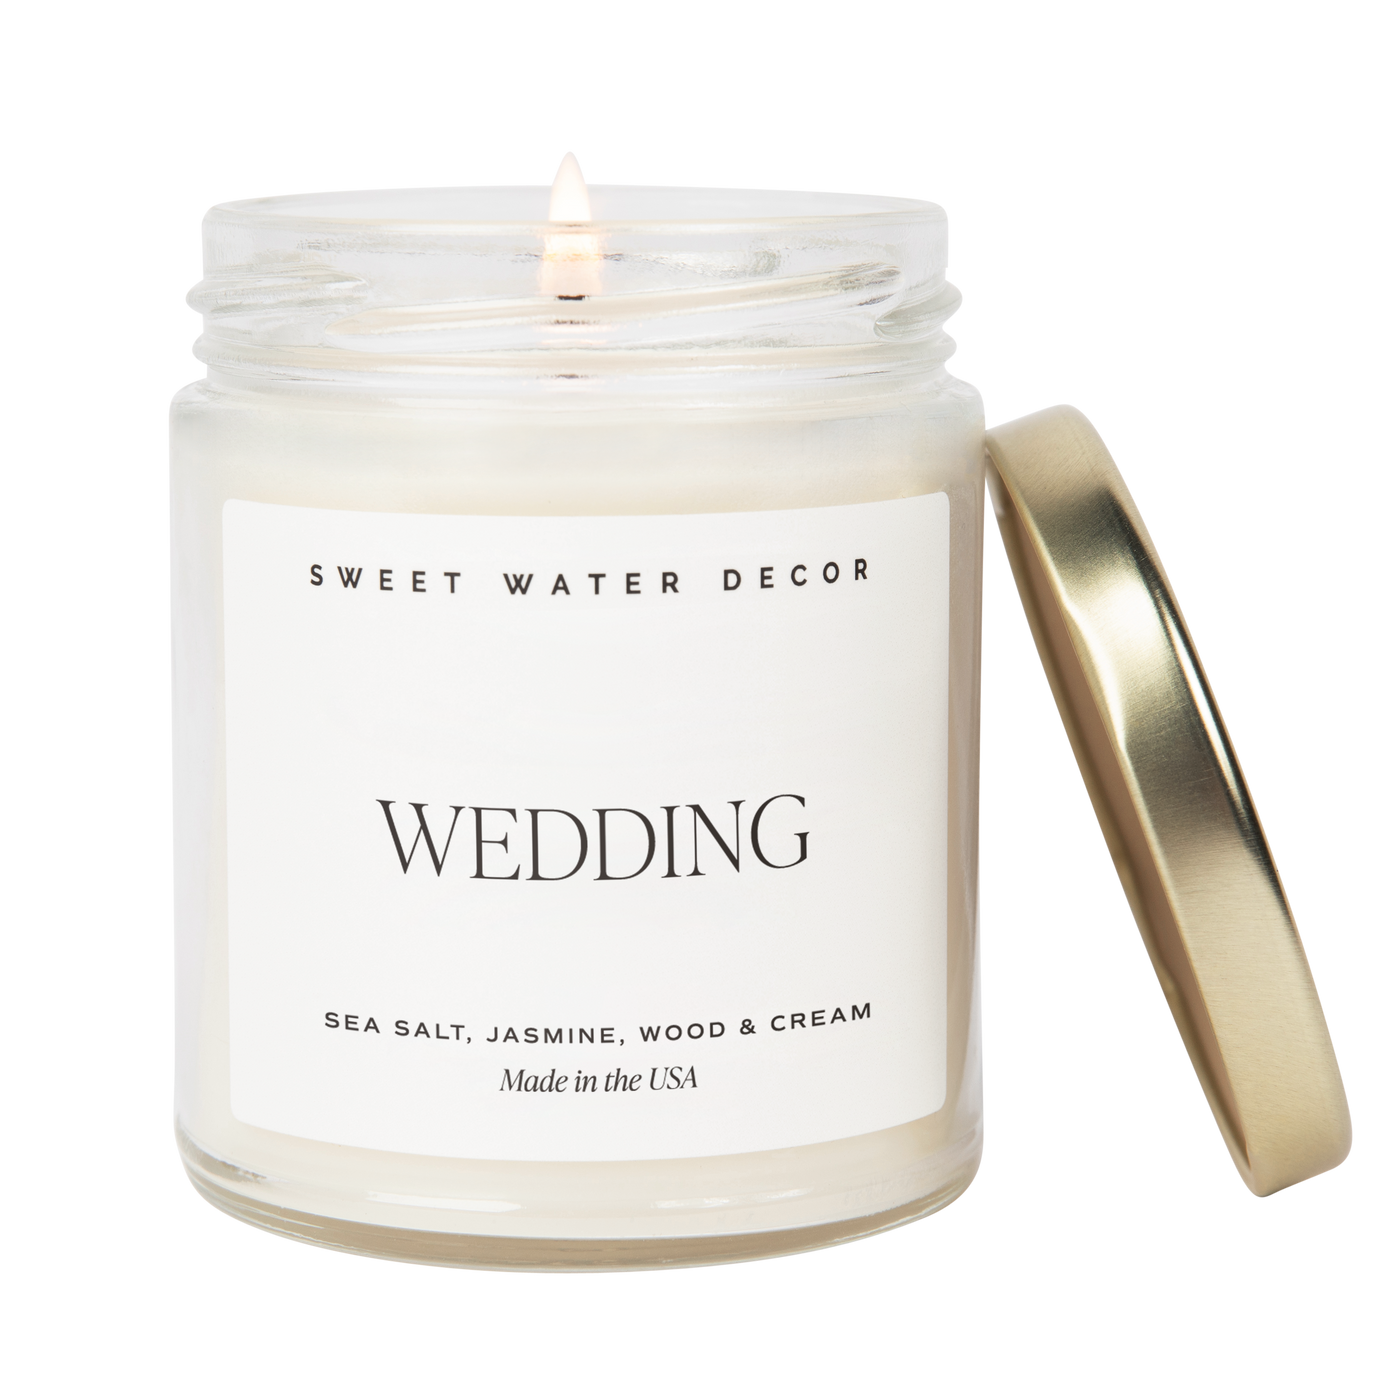 Wedding Soy Candle - White Text Label - 9 oz